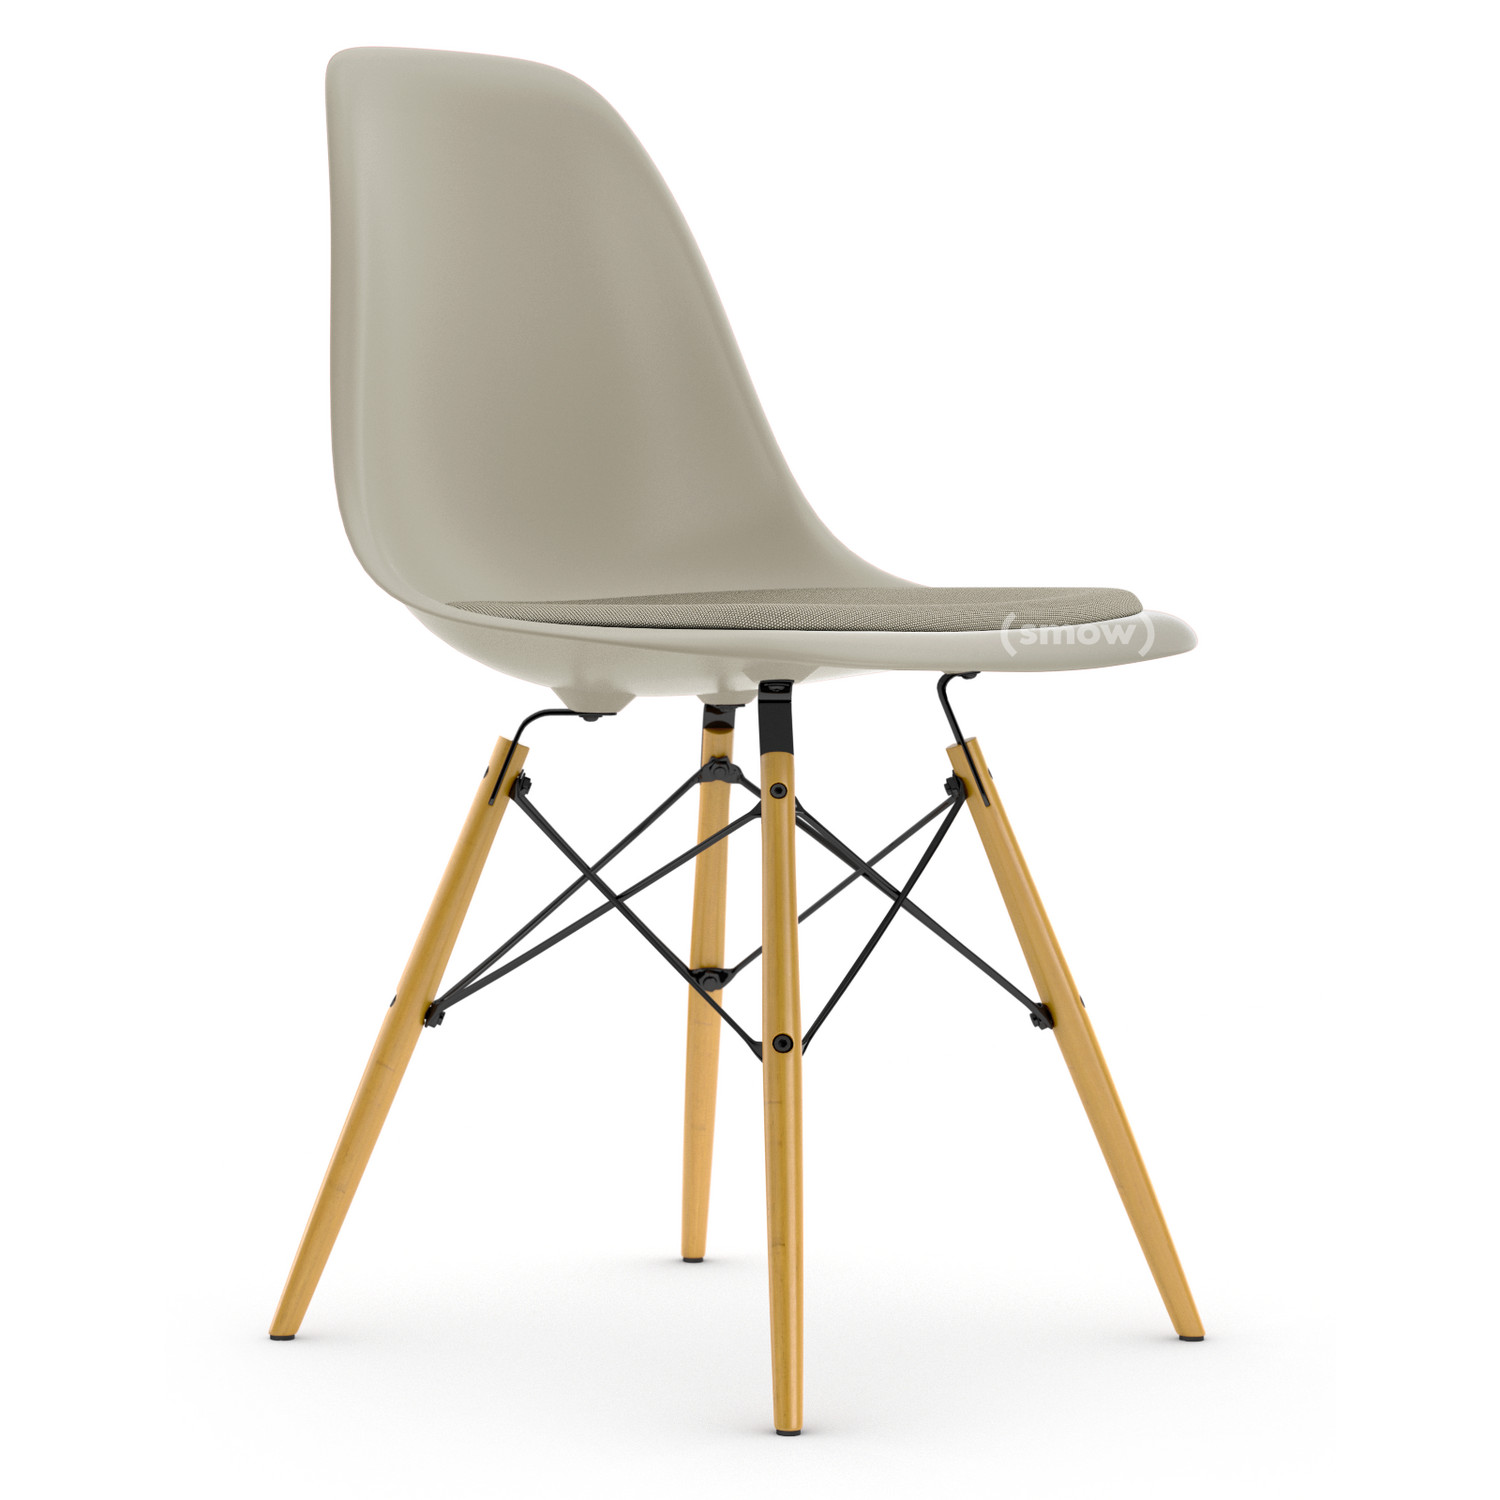 patroon Intiem Tether Vitra Eames Plastic Side Chair DSW, Pebble, With seat upholstery, Warm grey  / ivory, Standard version - 43 cm, Yellowish maple by Charles & Ray Eames,  1950 - Designer furniture by smow.com